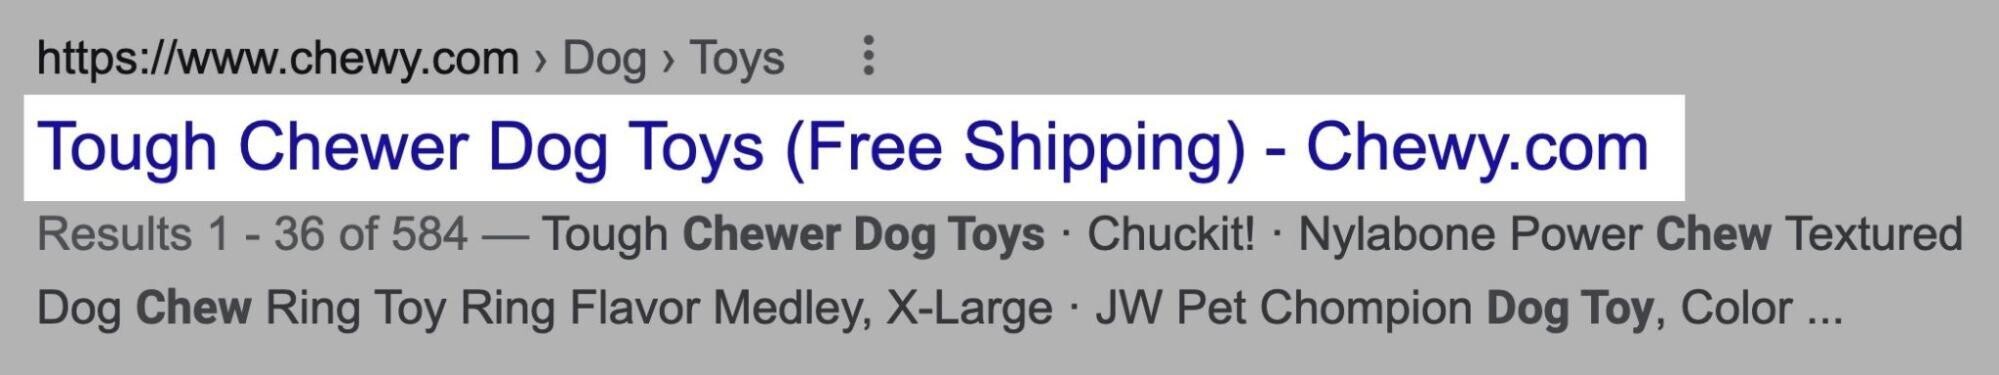 Title tag that says "Tough Chewer Dog Toys (Free Shipping) - Chewy.com"